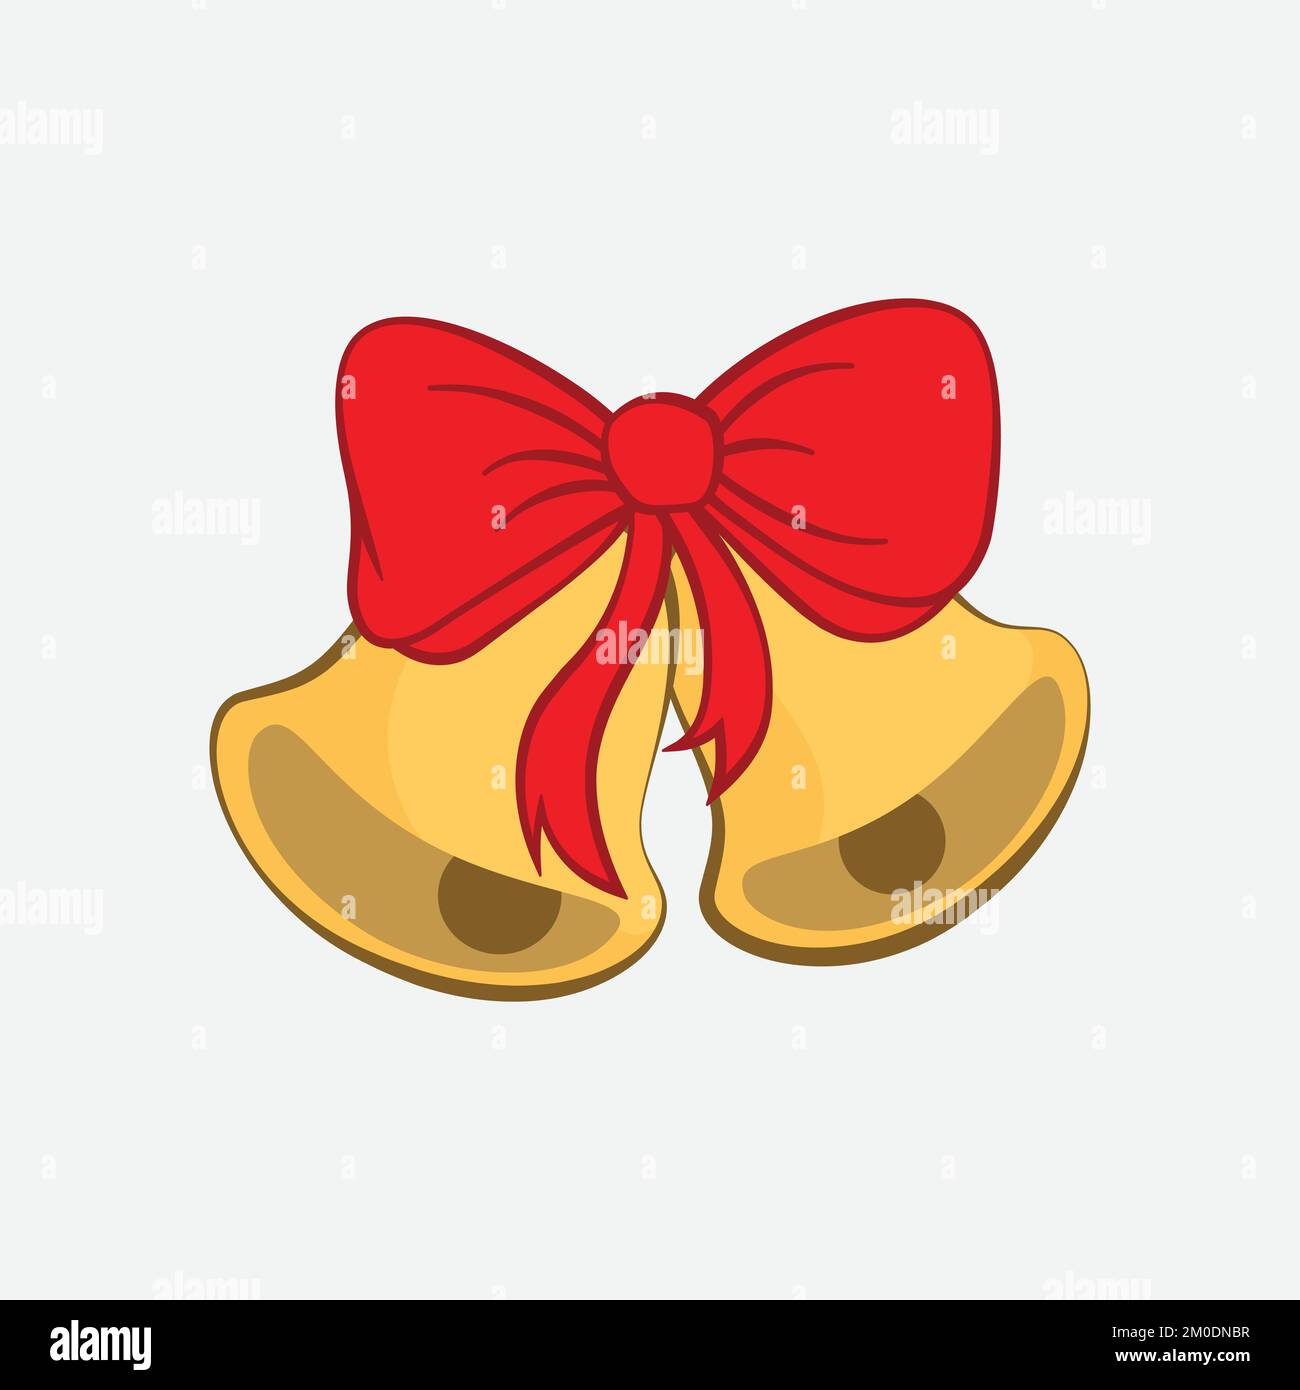 Shiny jingle bell Stock Vector Images - Alamy